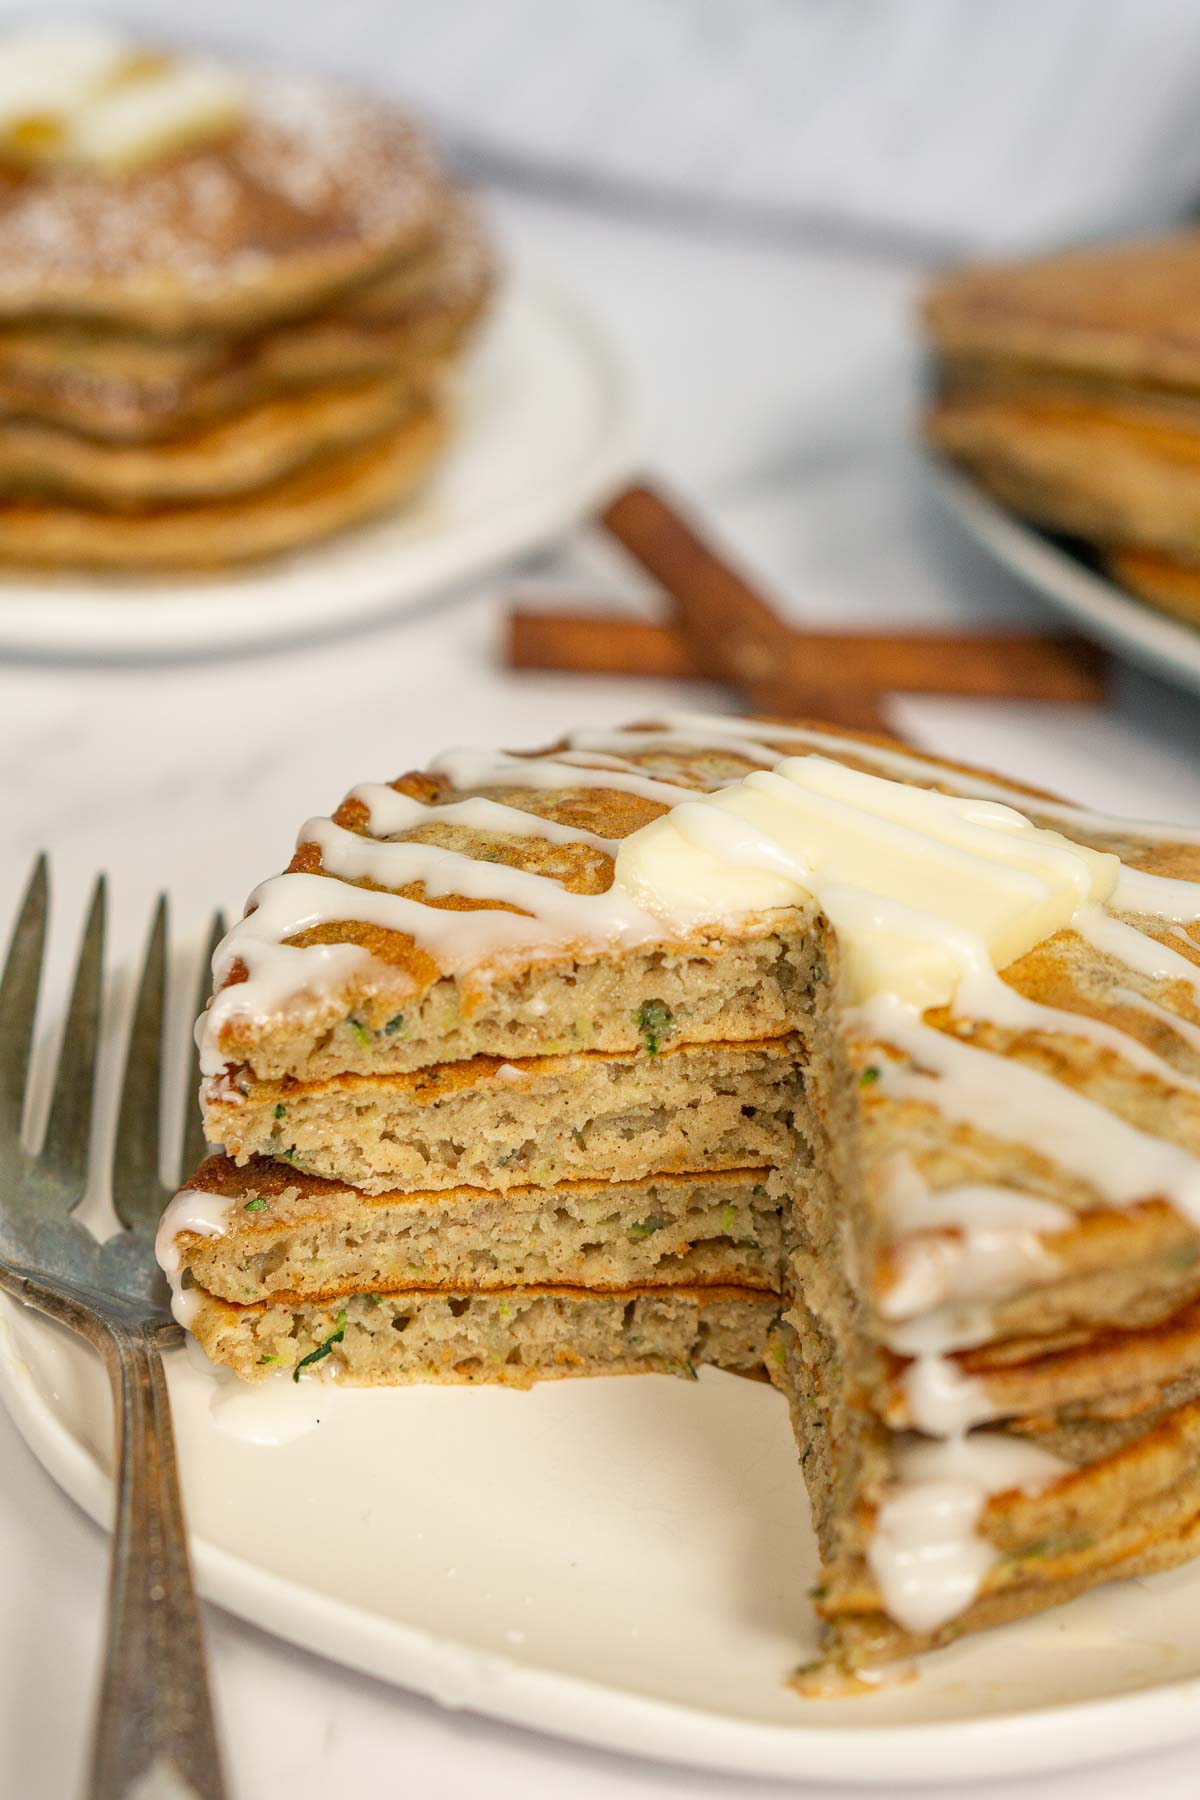 Plate of zucchini bread pancakes cut open to show texture inside.